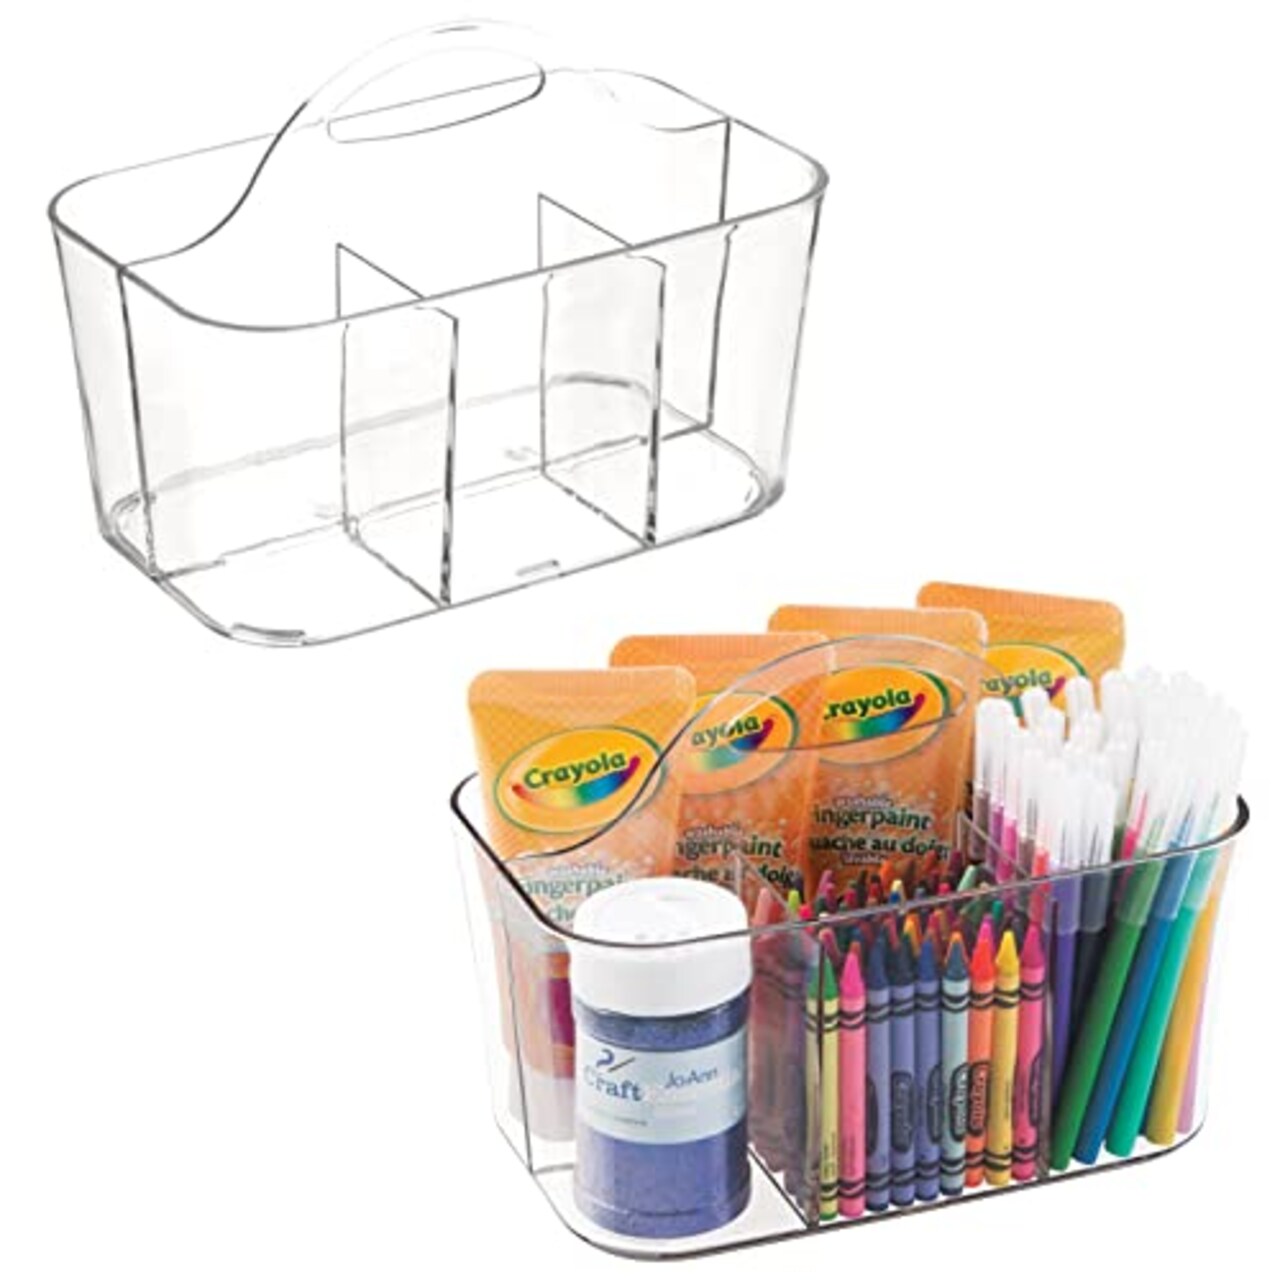 mDesign Plastic Portable Craft Storage Organizer Caddy Tote, Divided Basket  Bin with Handle for Crafts, Sewing, Art Supplies - Holds Brushes, Colored  Pencils - Lumiere Collection - 2 Pack - Clear